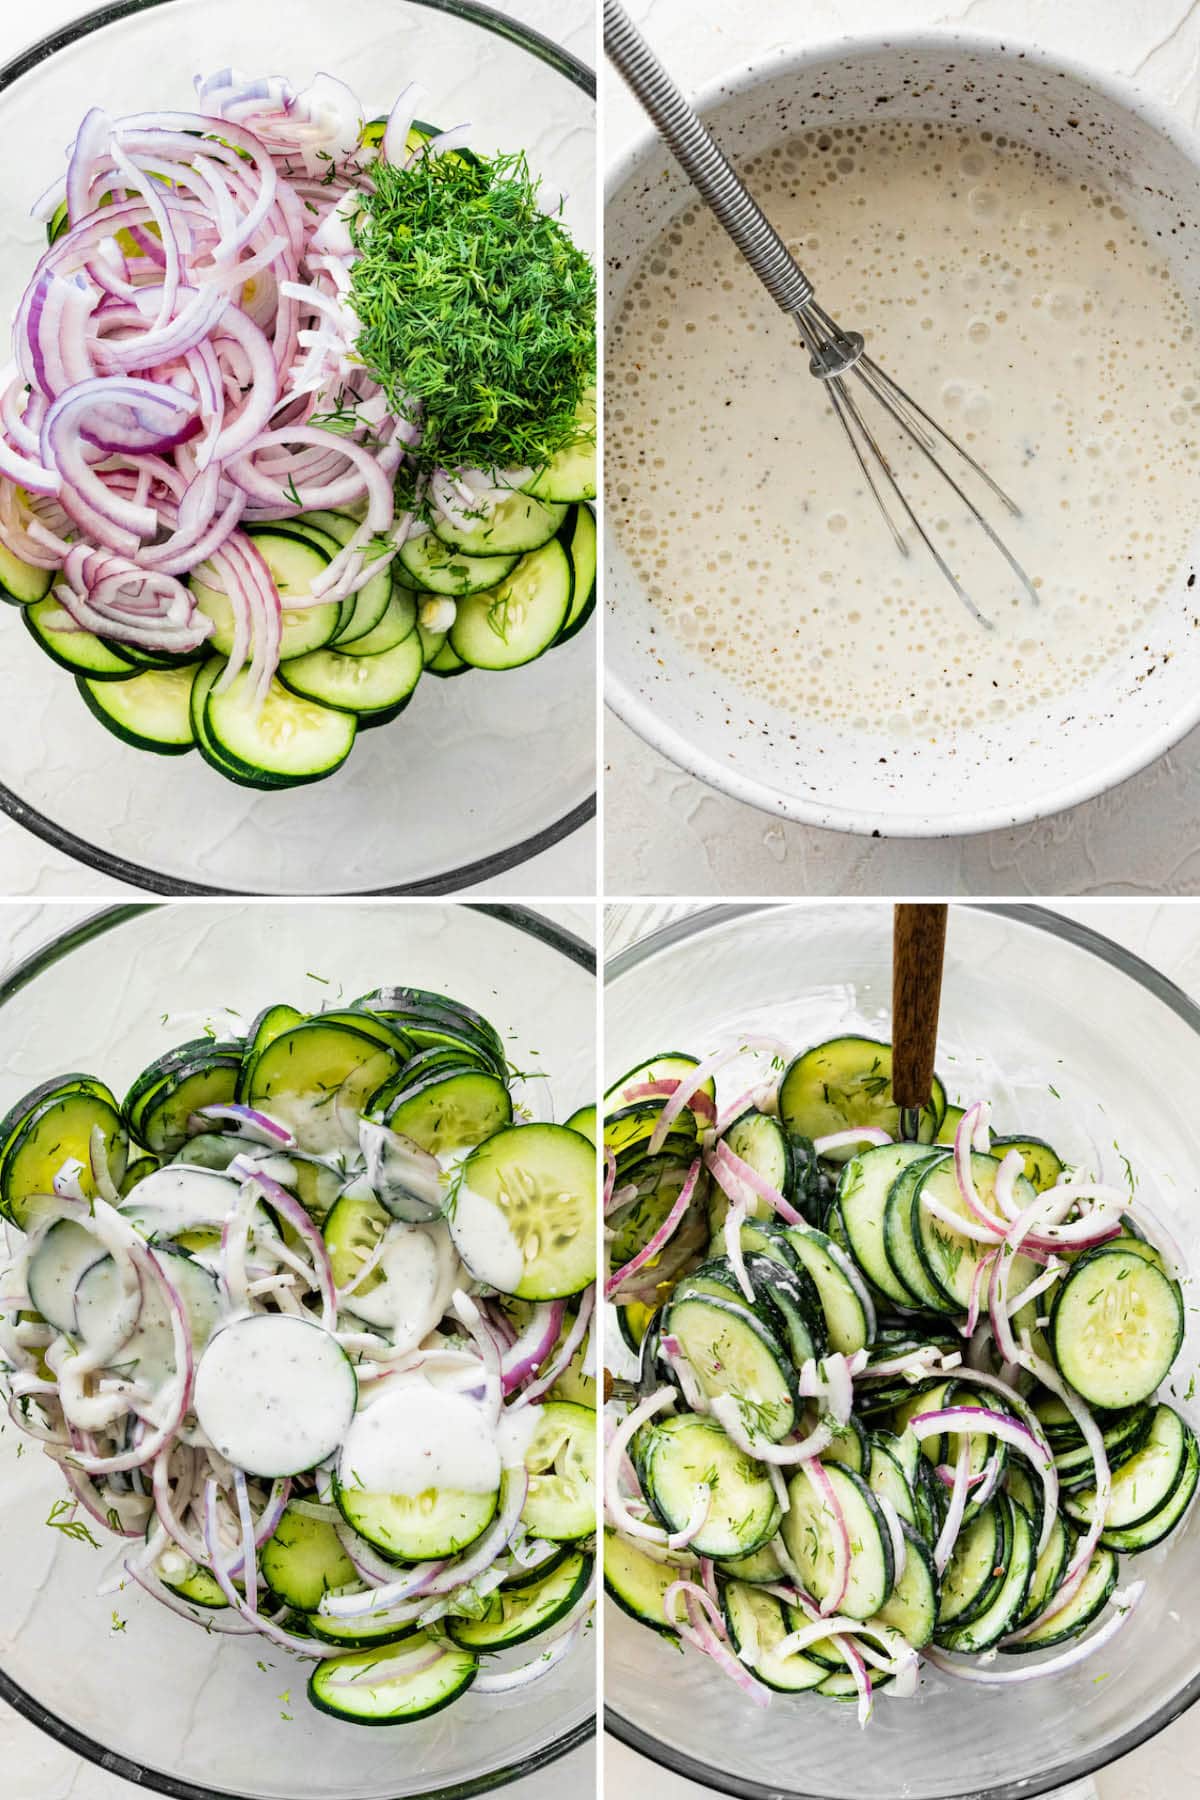 Collage of four photos showing the steps to make a creamy cucumber salad: add onion, cucumber, and dill to a bowl, whisk together a Greek yogurt dressing, then toss the salad together.